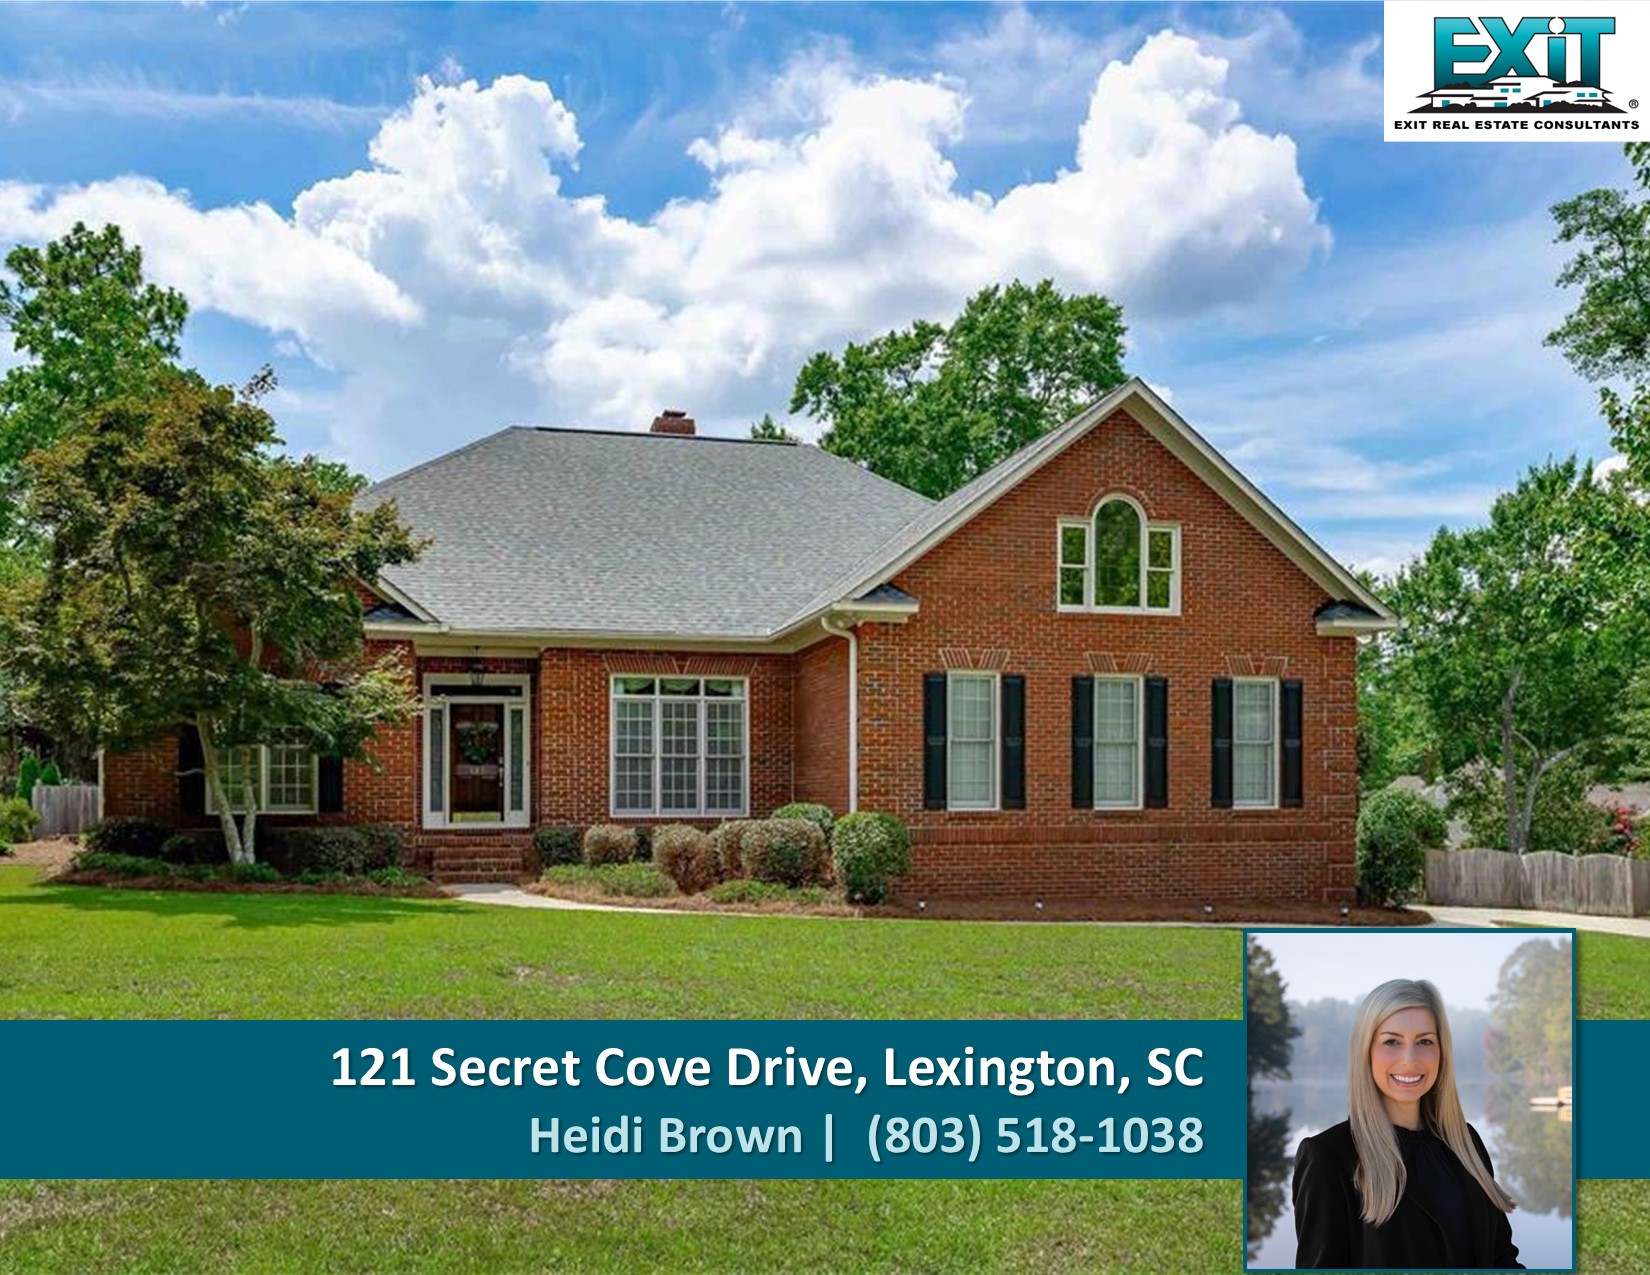 Just listed in Secret Cove